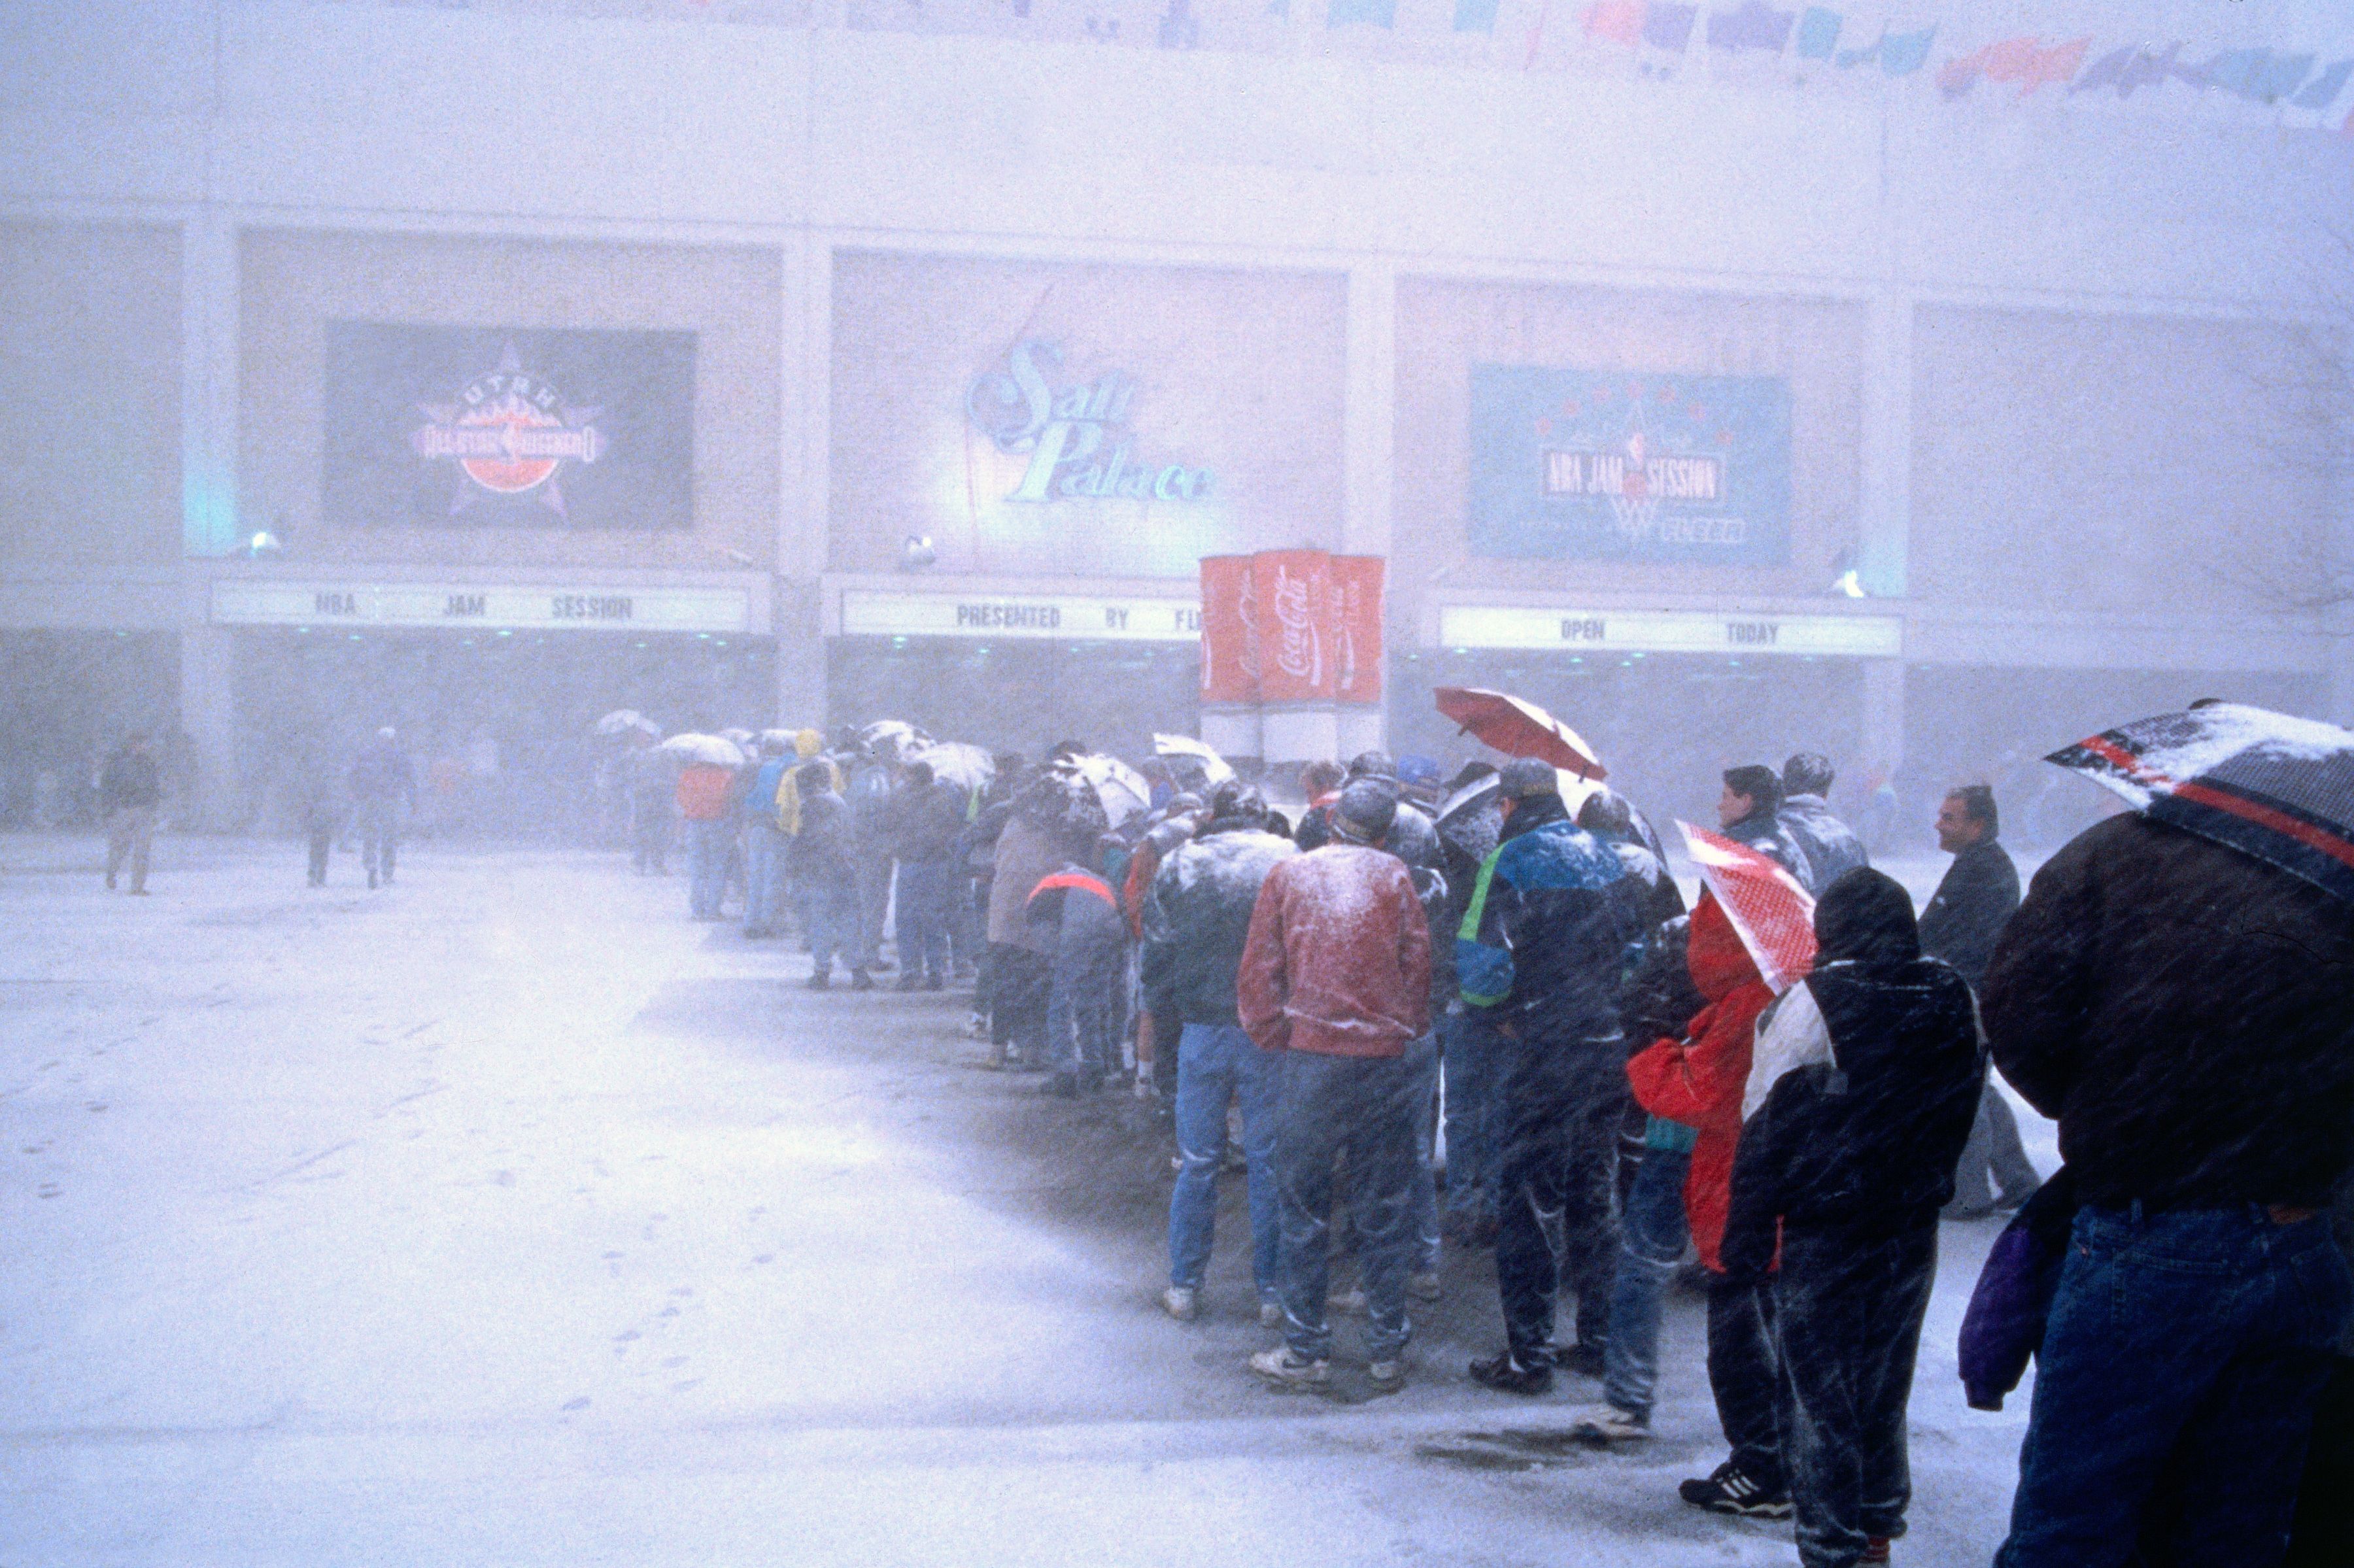 People wait outside in a long line to get into a venue during a blizzard.